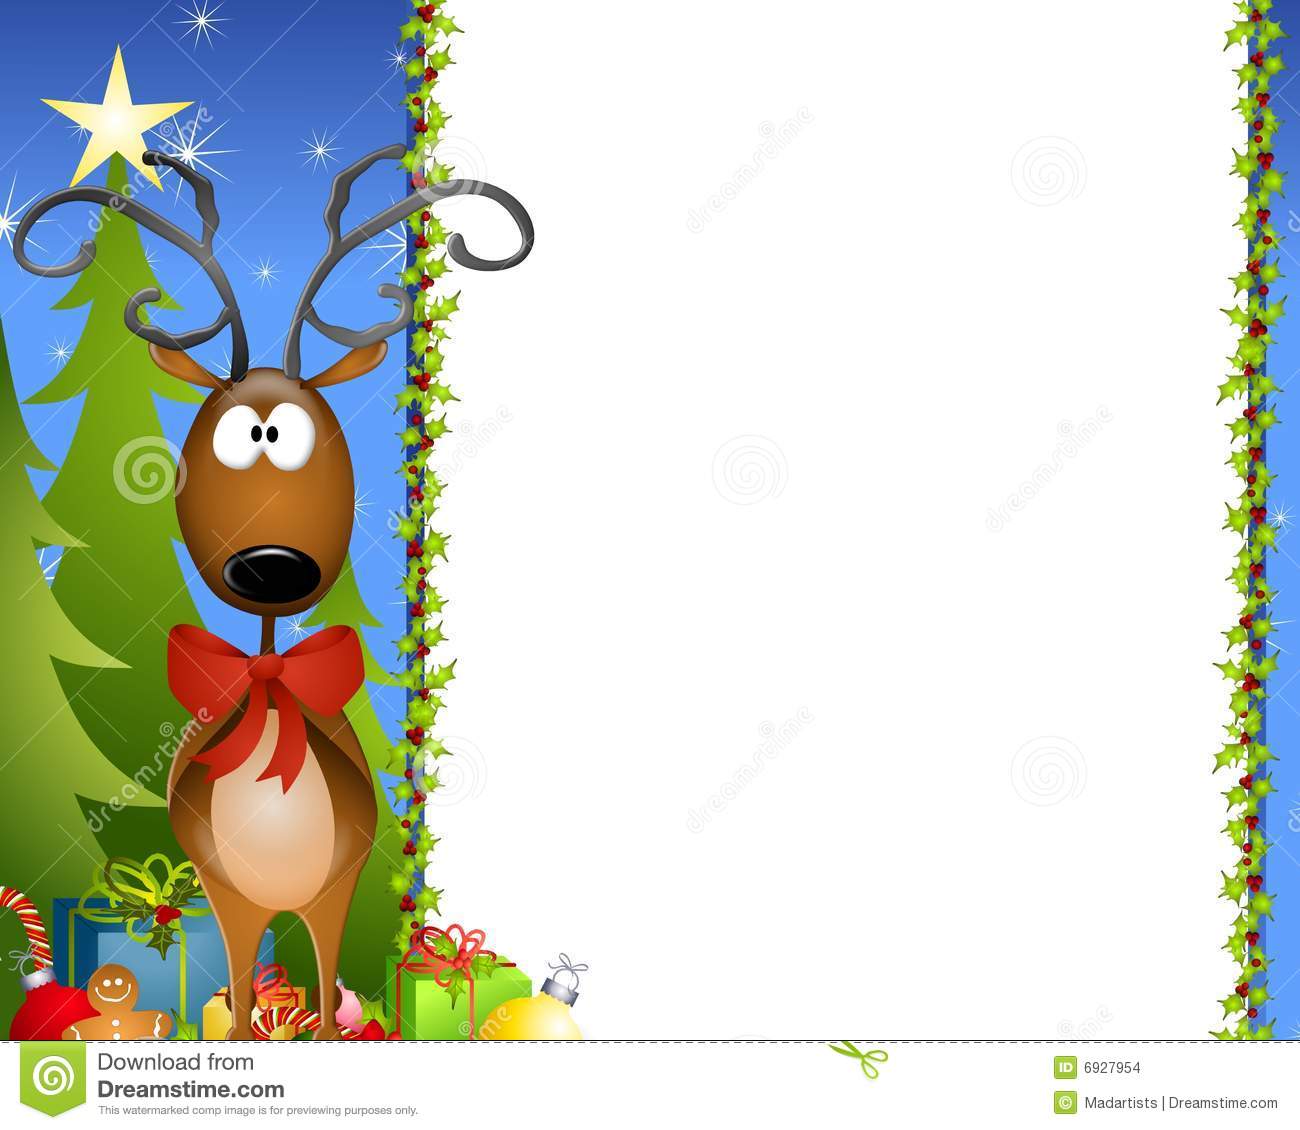 Border Illustration Featuring A Christmas Tree Border With Reindeer